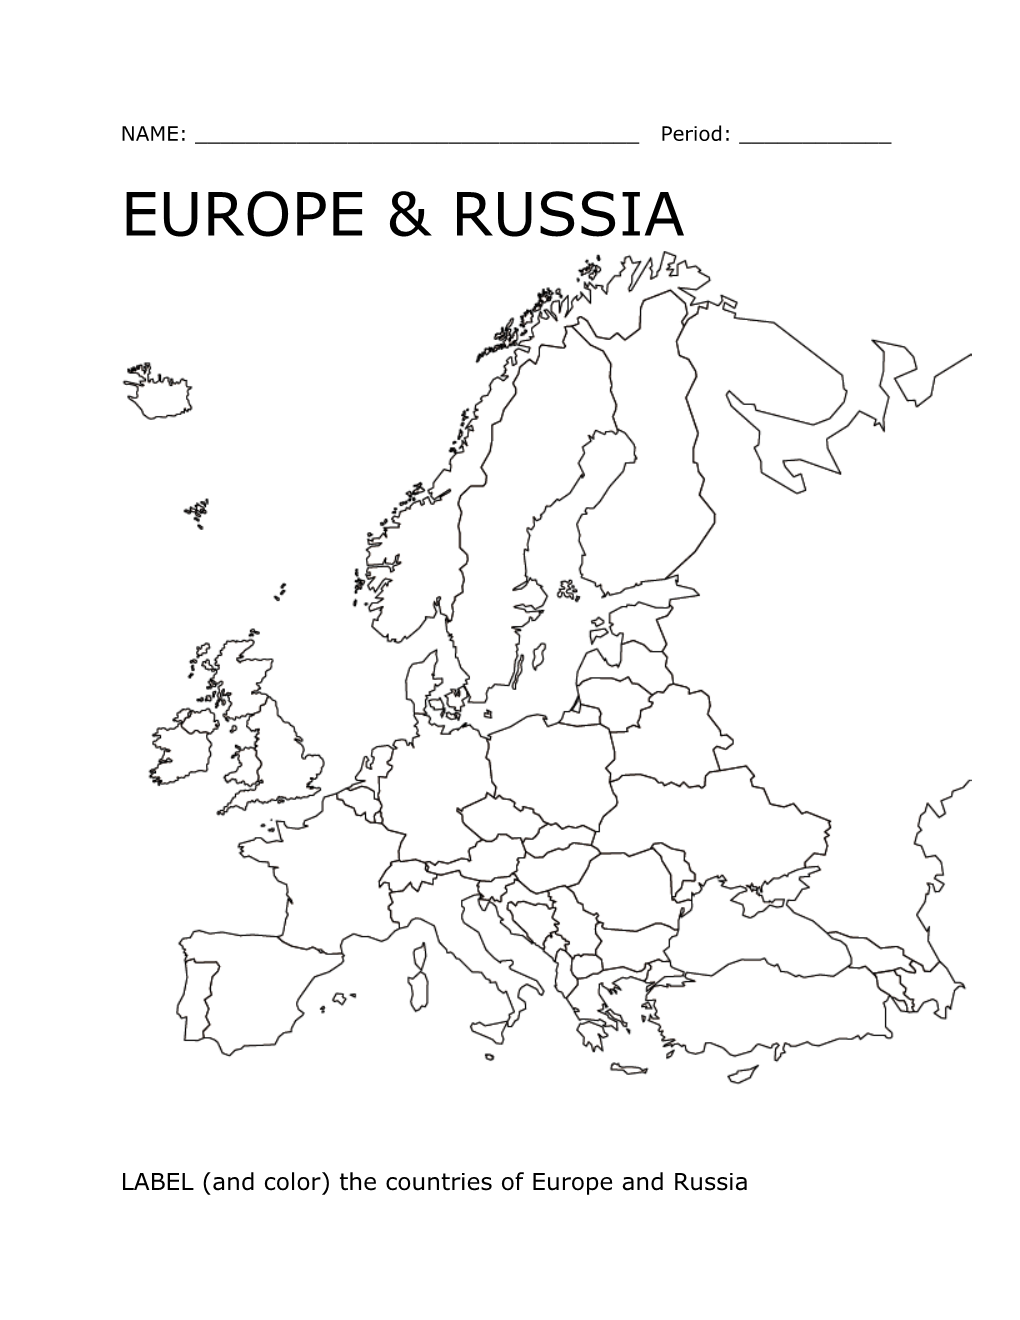 LABEL (And Color) the Countries of Europe and Russia